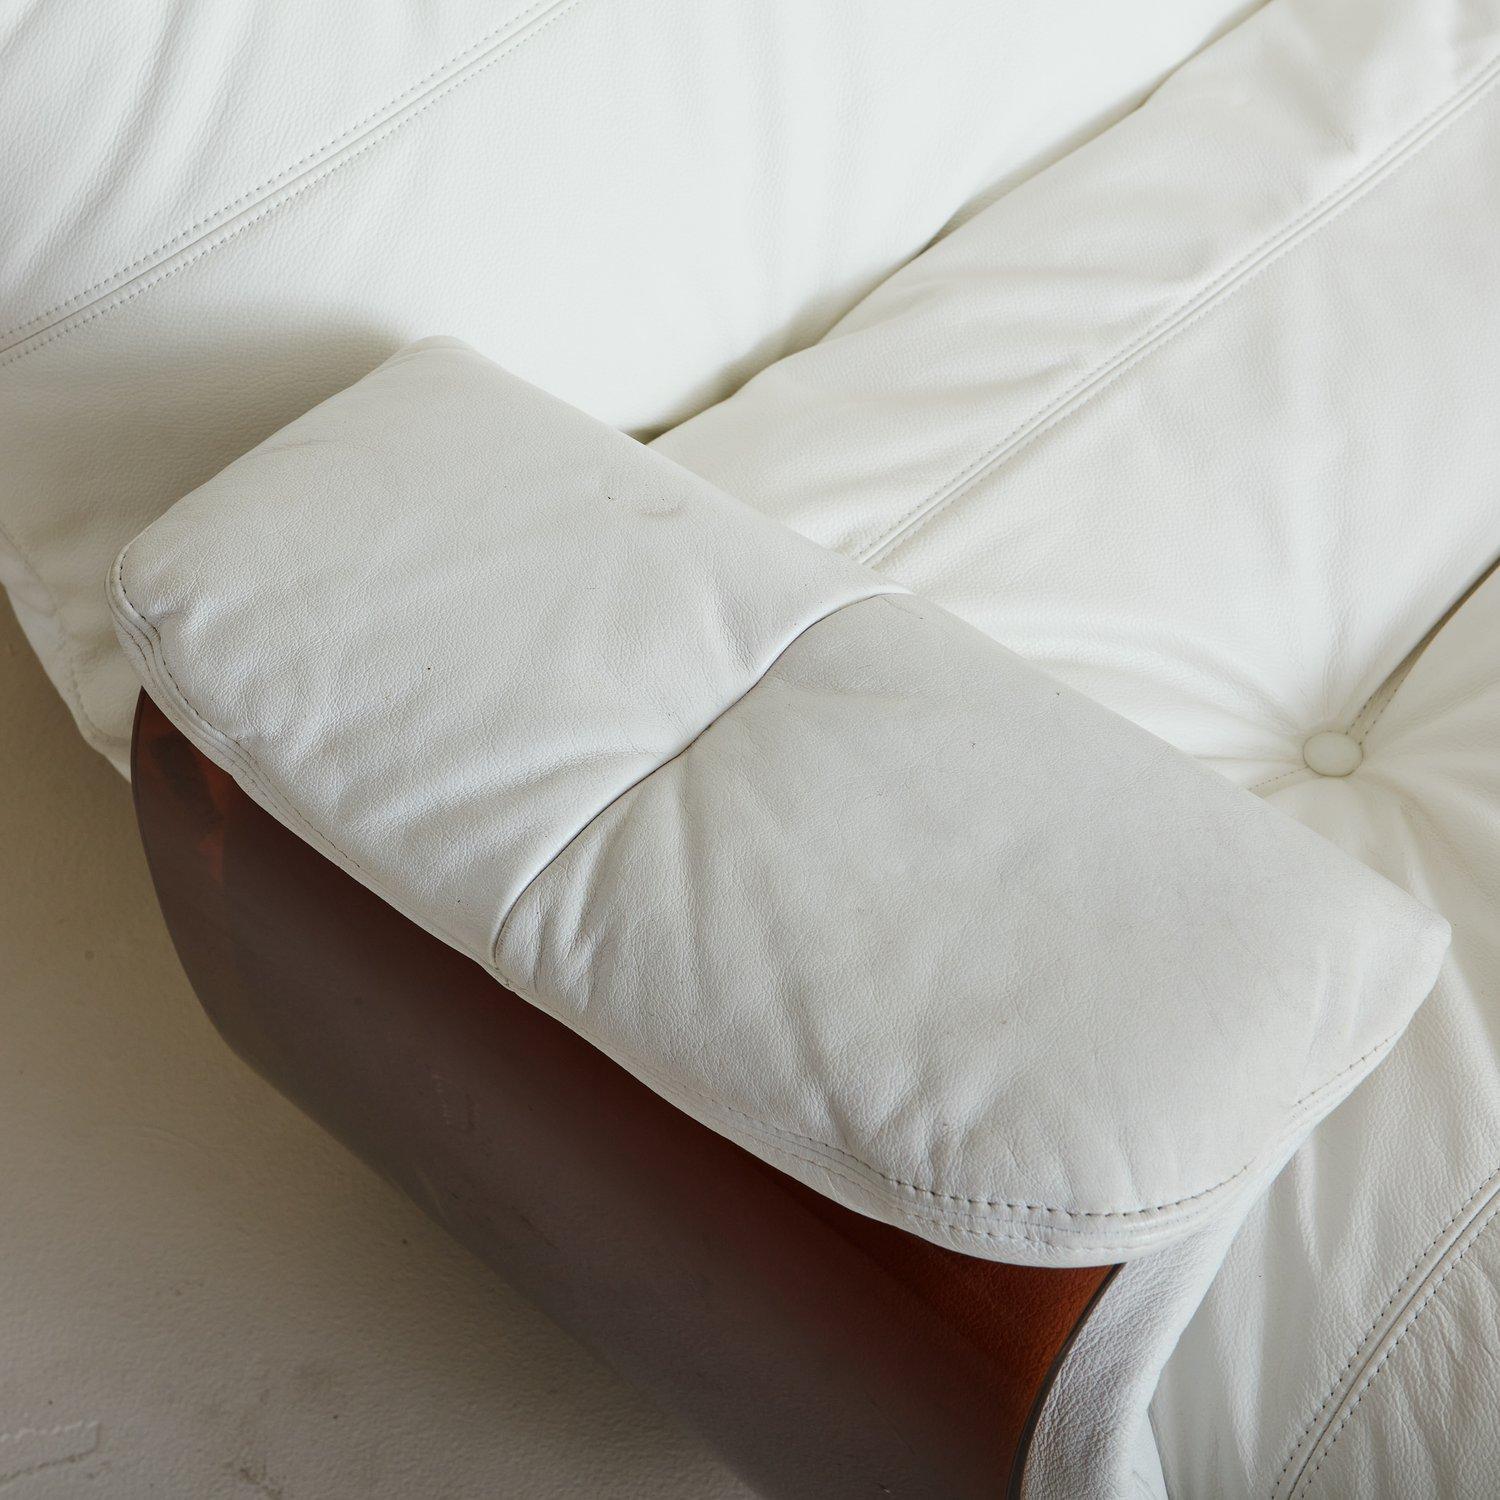 White Leather Marsala Chair by Michel Ducaroy for Ligne Roset, France 1970s For Sale 4